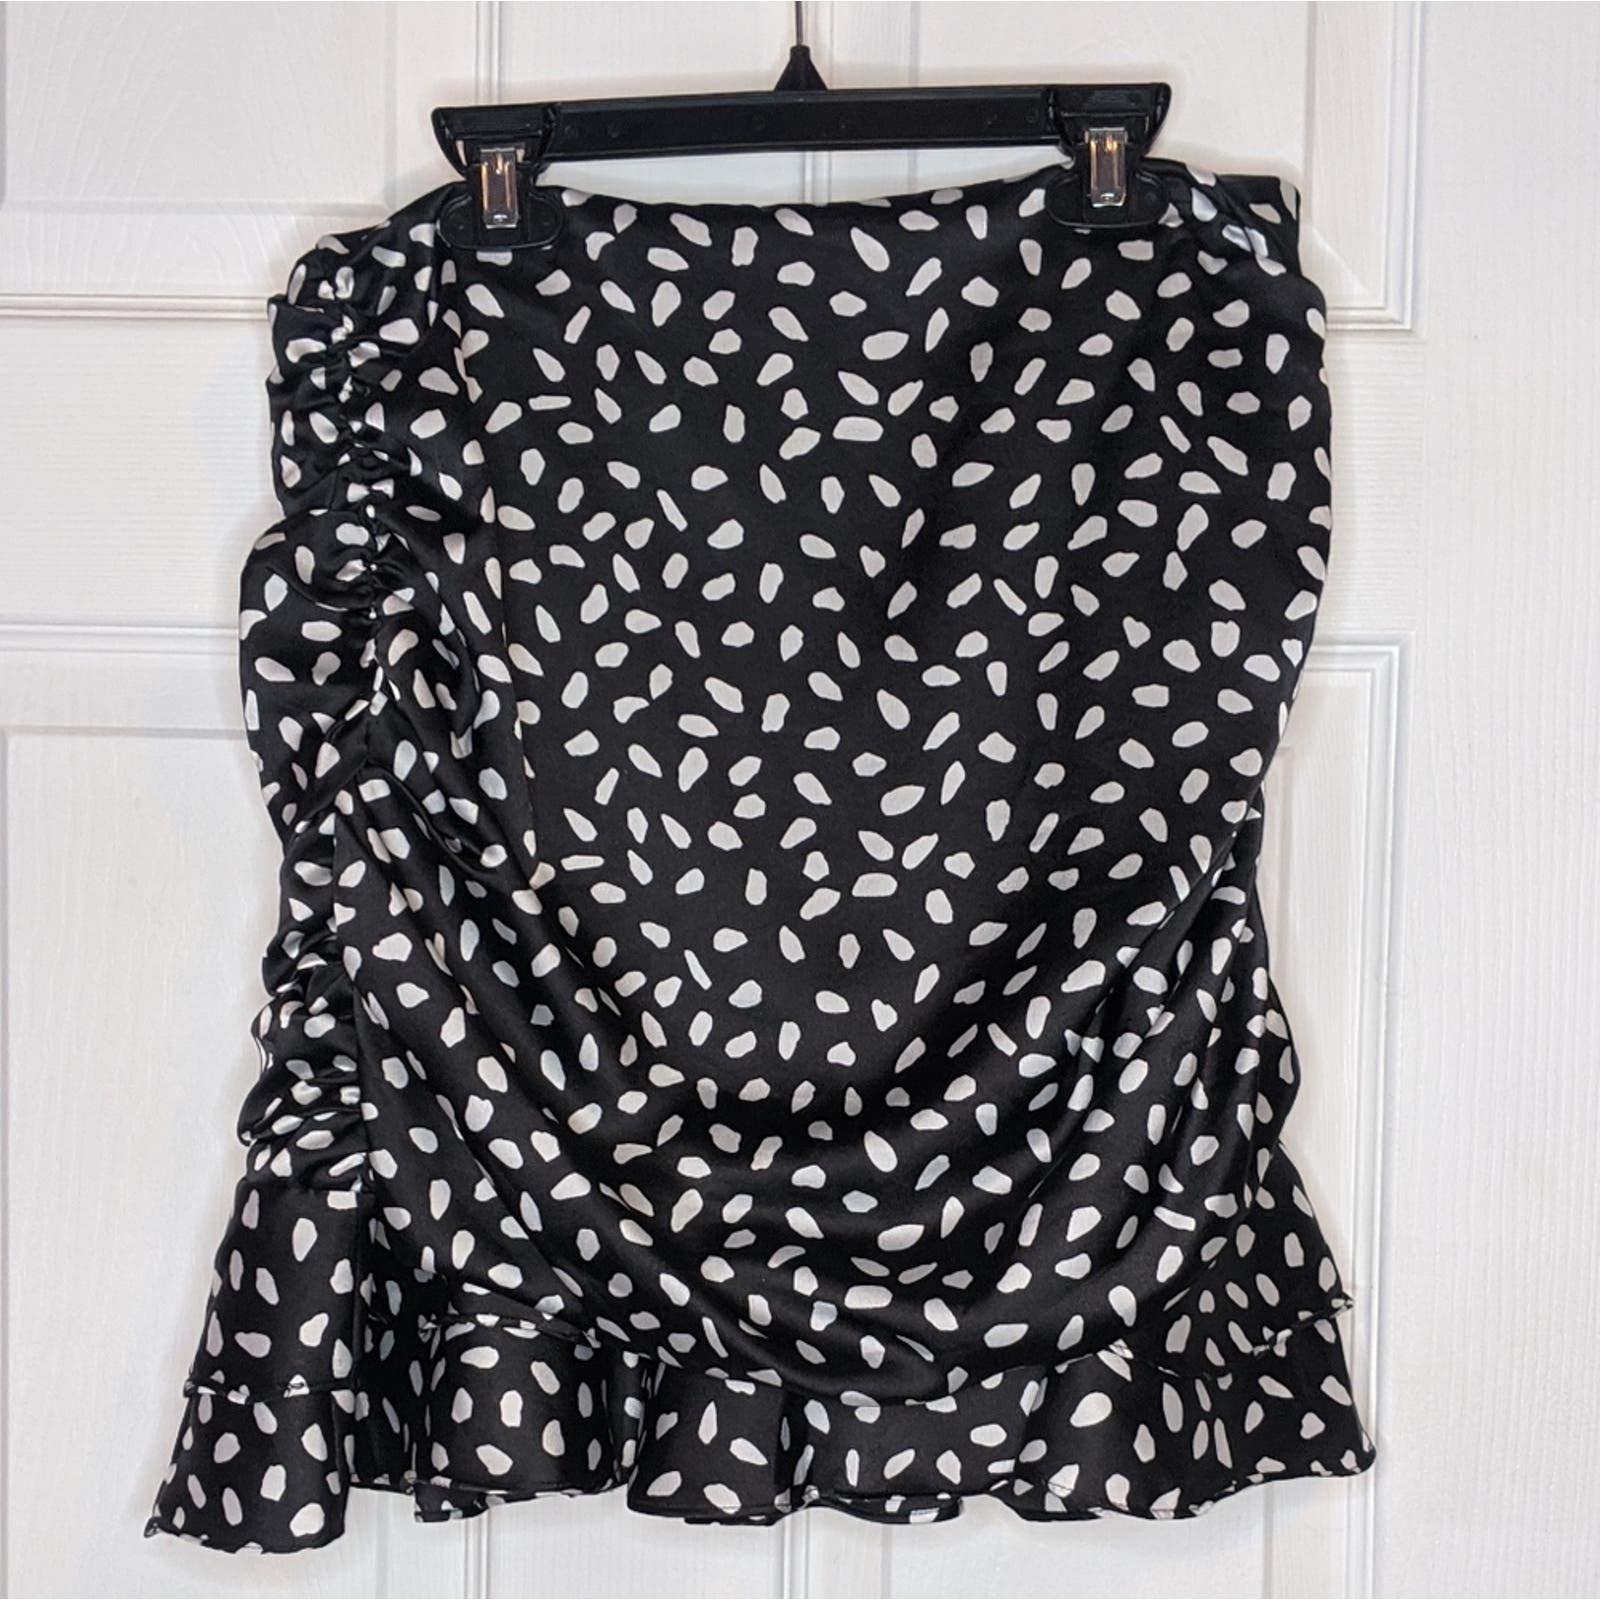 Custom Leche Black & White Polka Dot Pattern Ruched Ruffle Trim Skirt L m2bIsK7un Everyday Low Prices